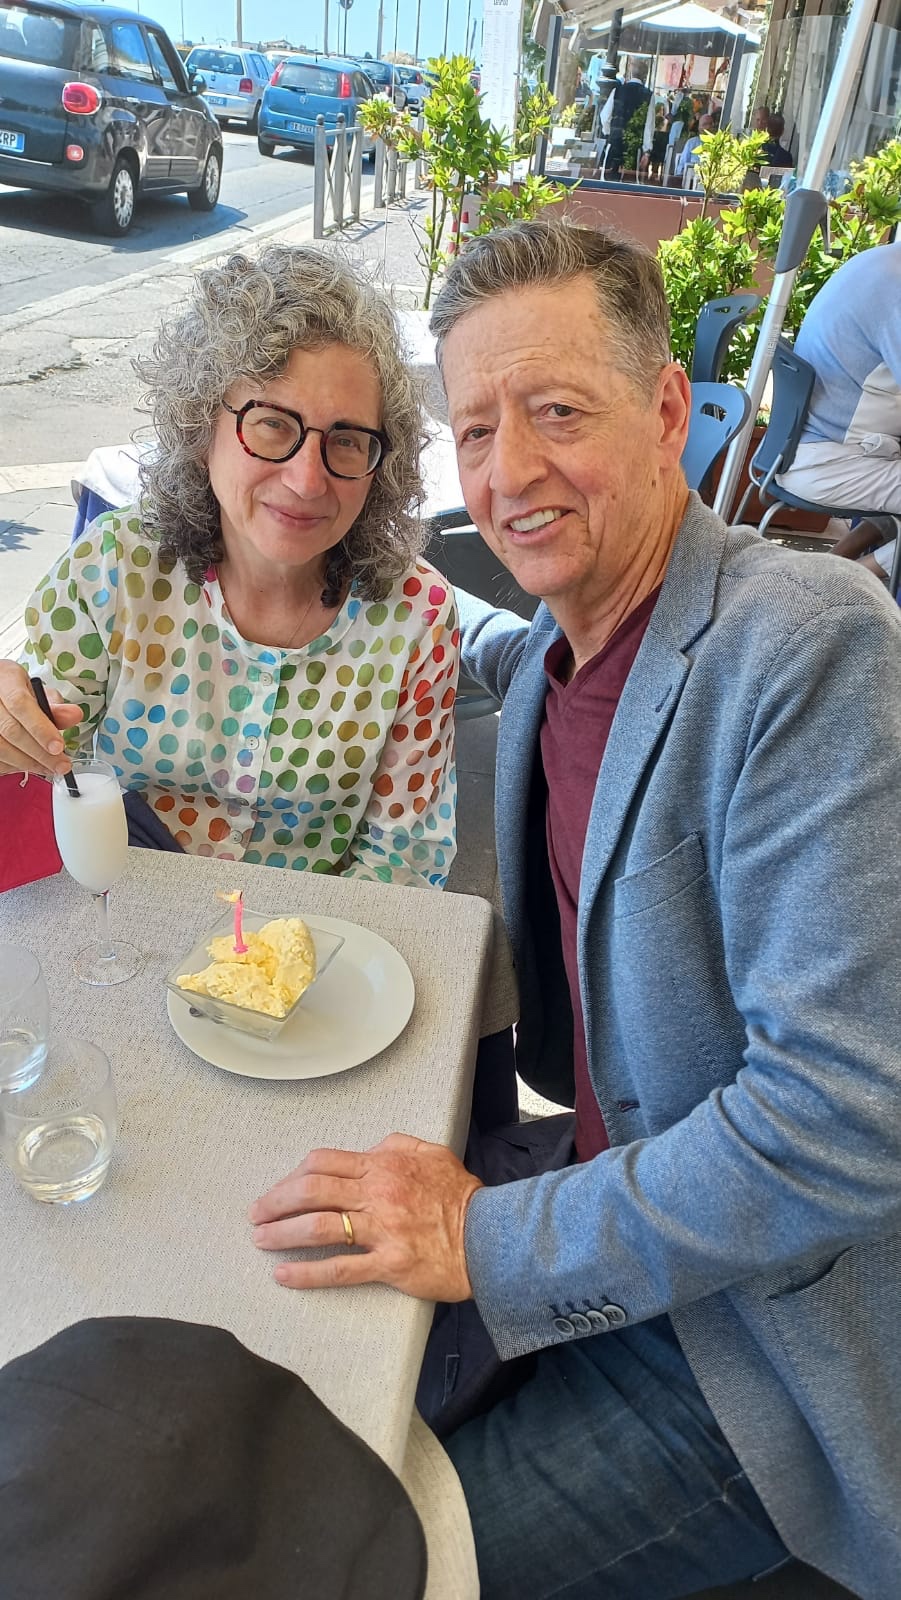 A birthday in Italy….